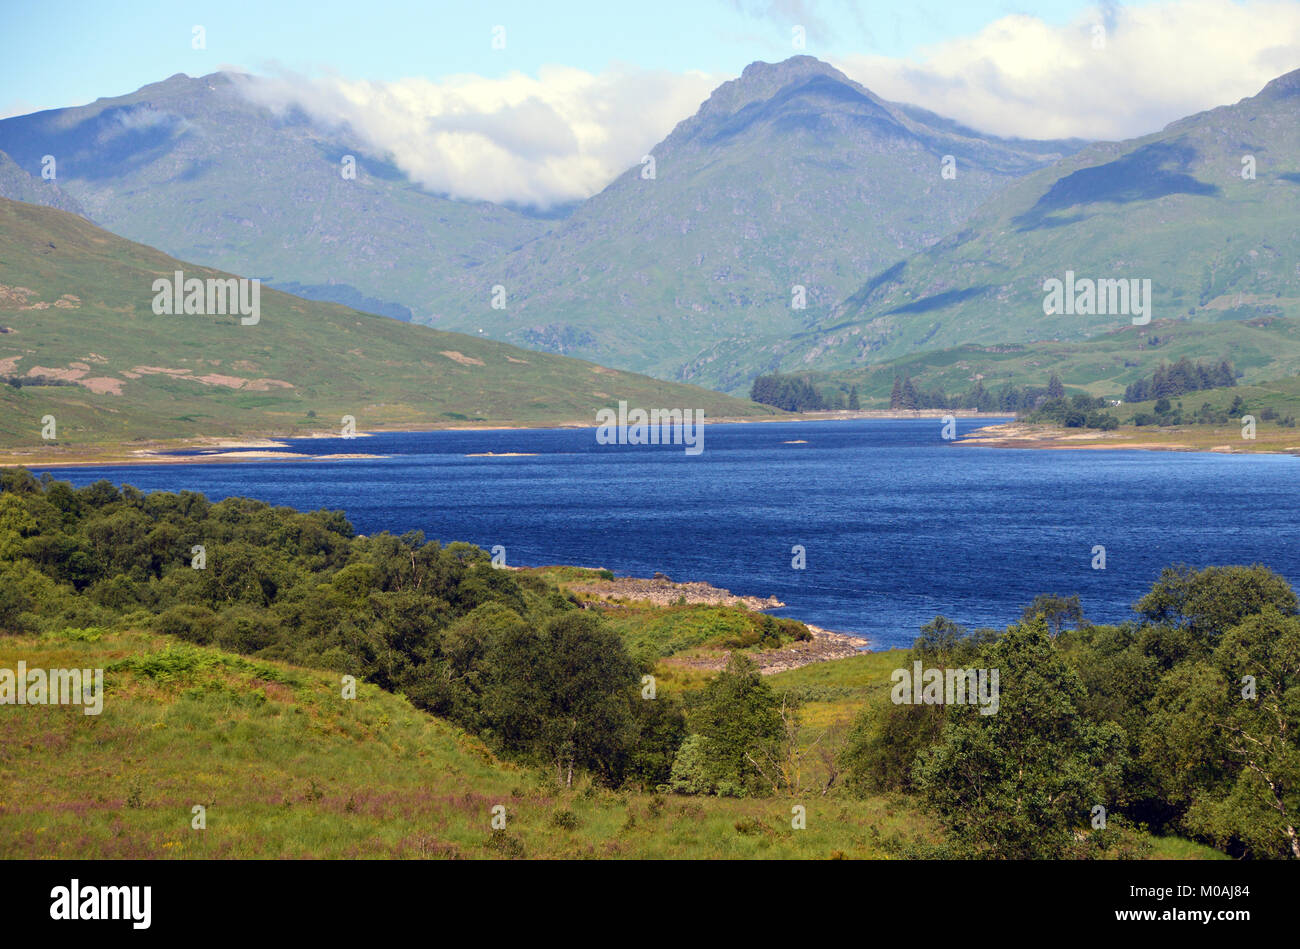 The Scottish Mountain Munros Beinn Ime and Ben Vane from Loch Arklet in the Scottish Highlands, UK. Stock Photo